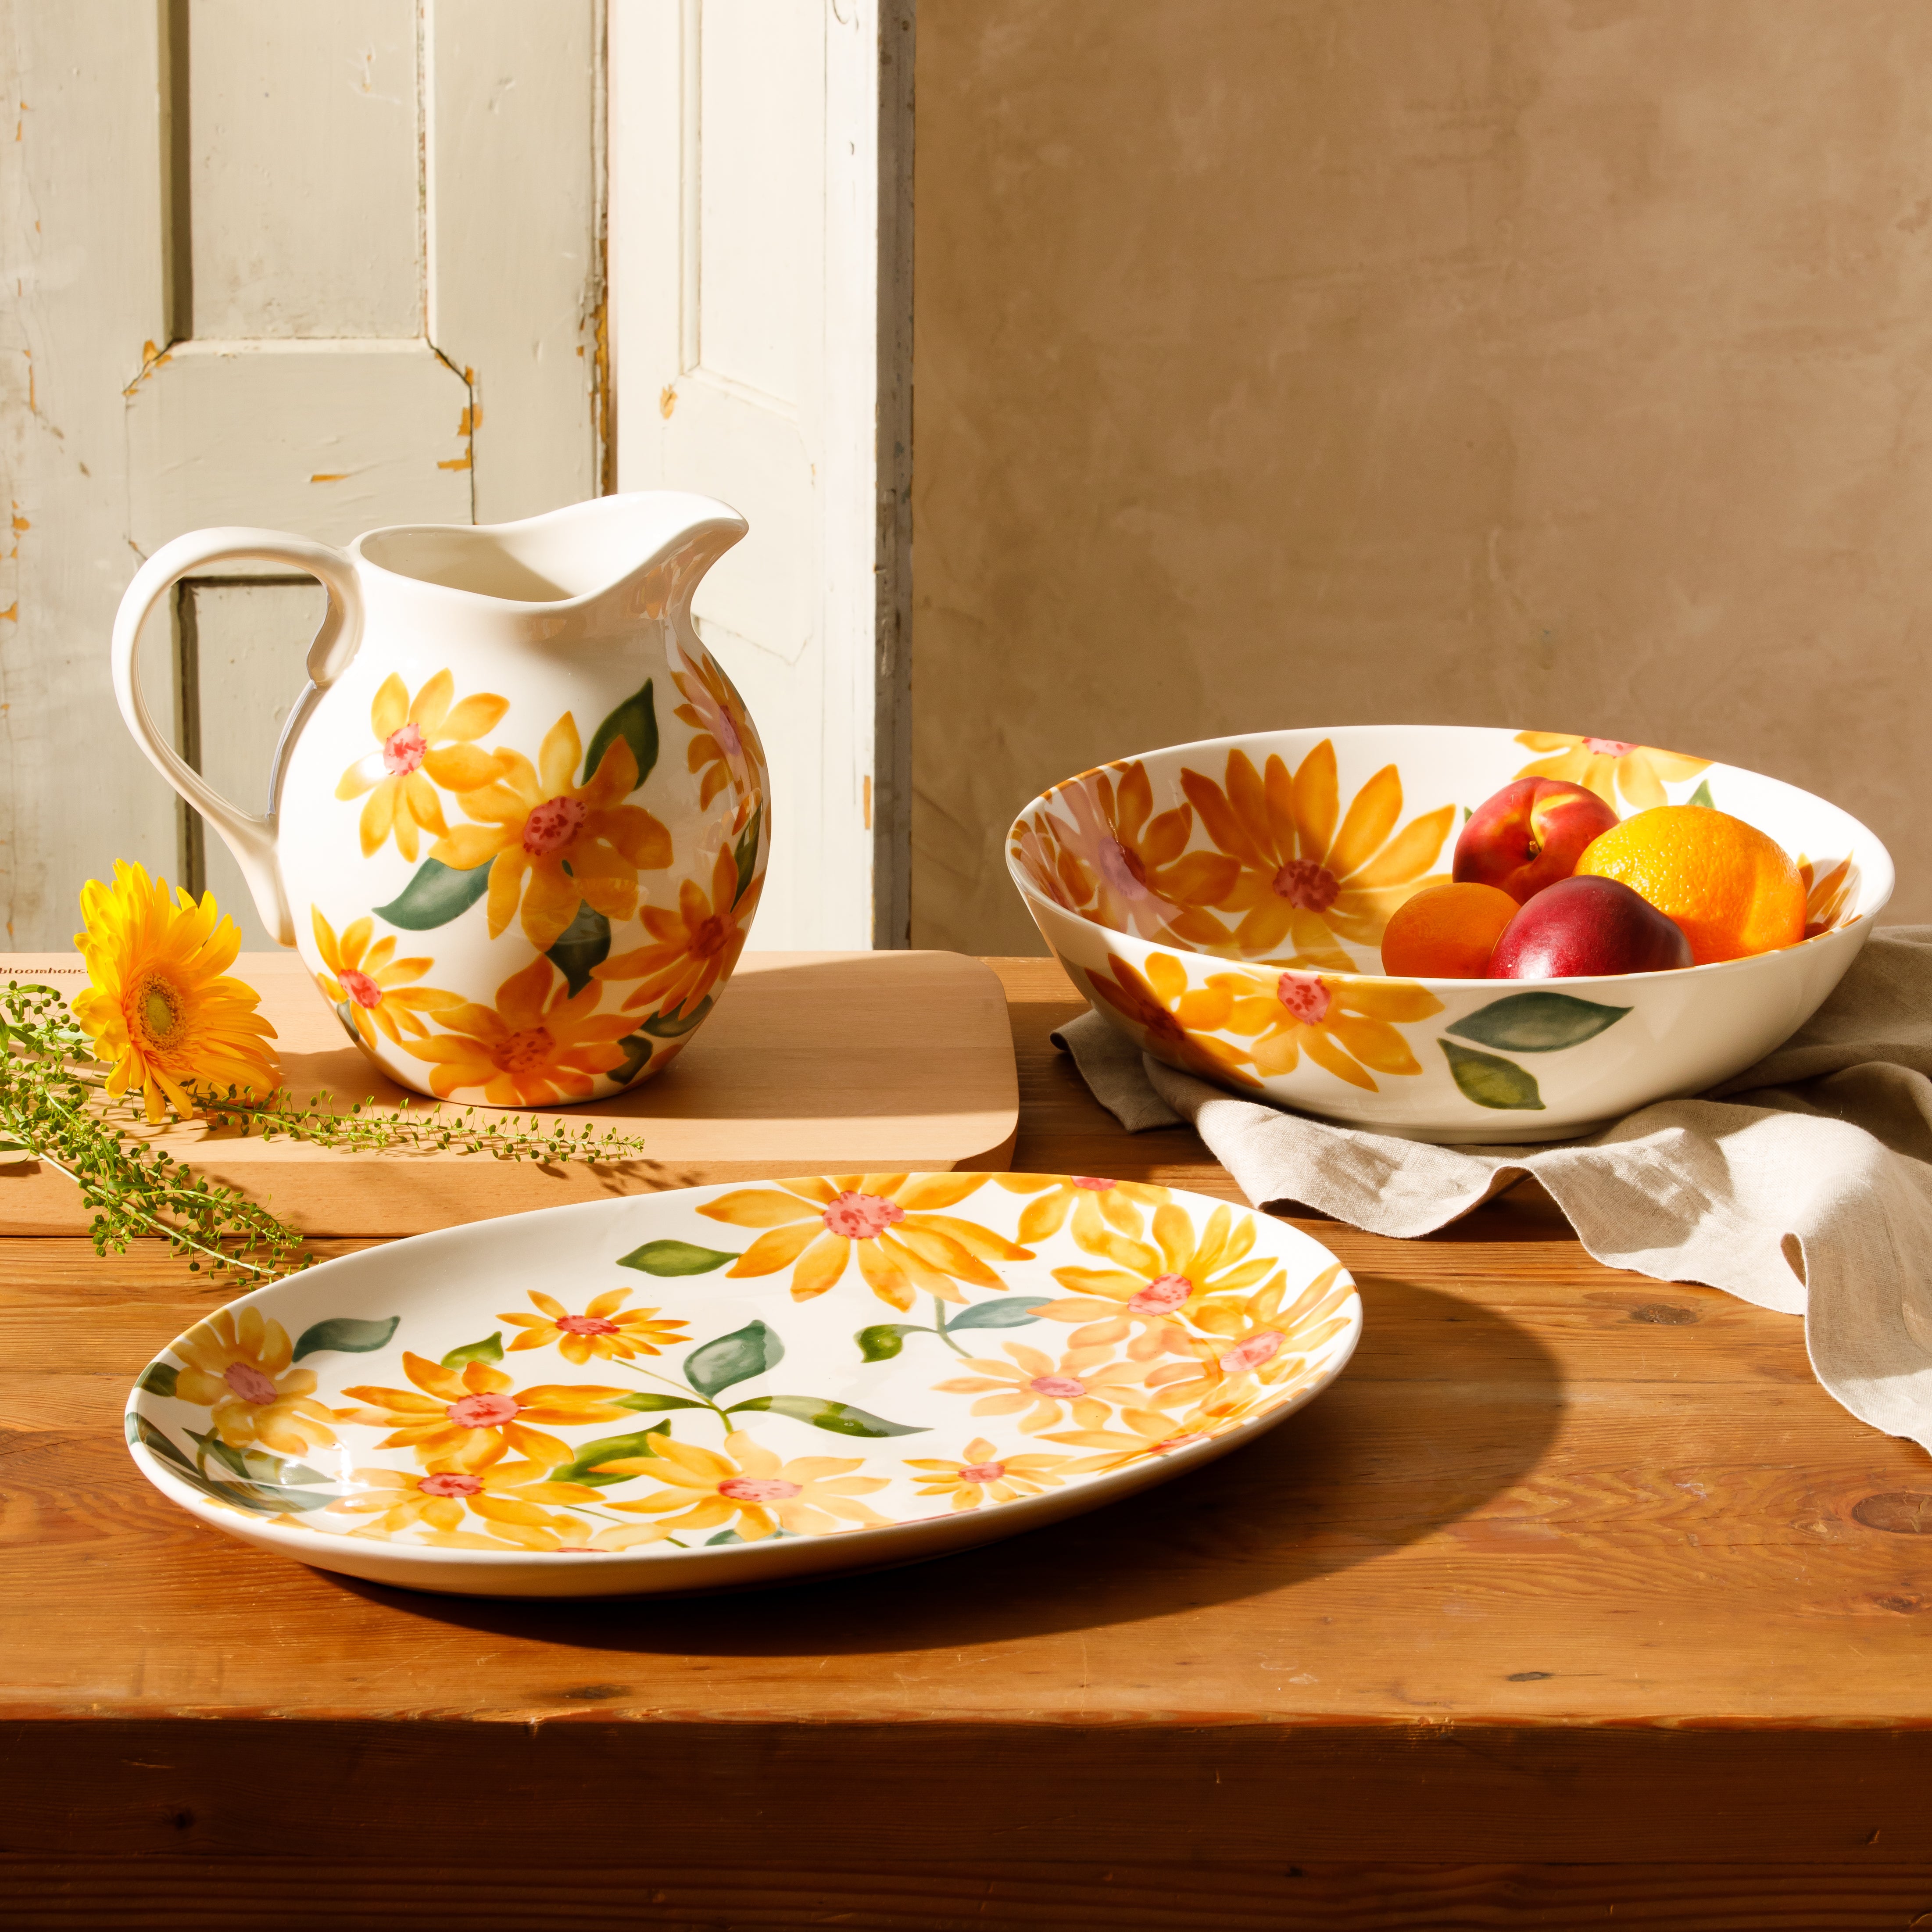 Bloomhouse Sunnyflower 2-Piece Hand-Painted Floral Stoneware Serving Set